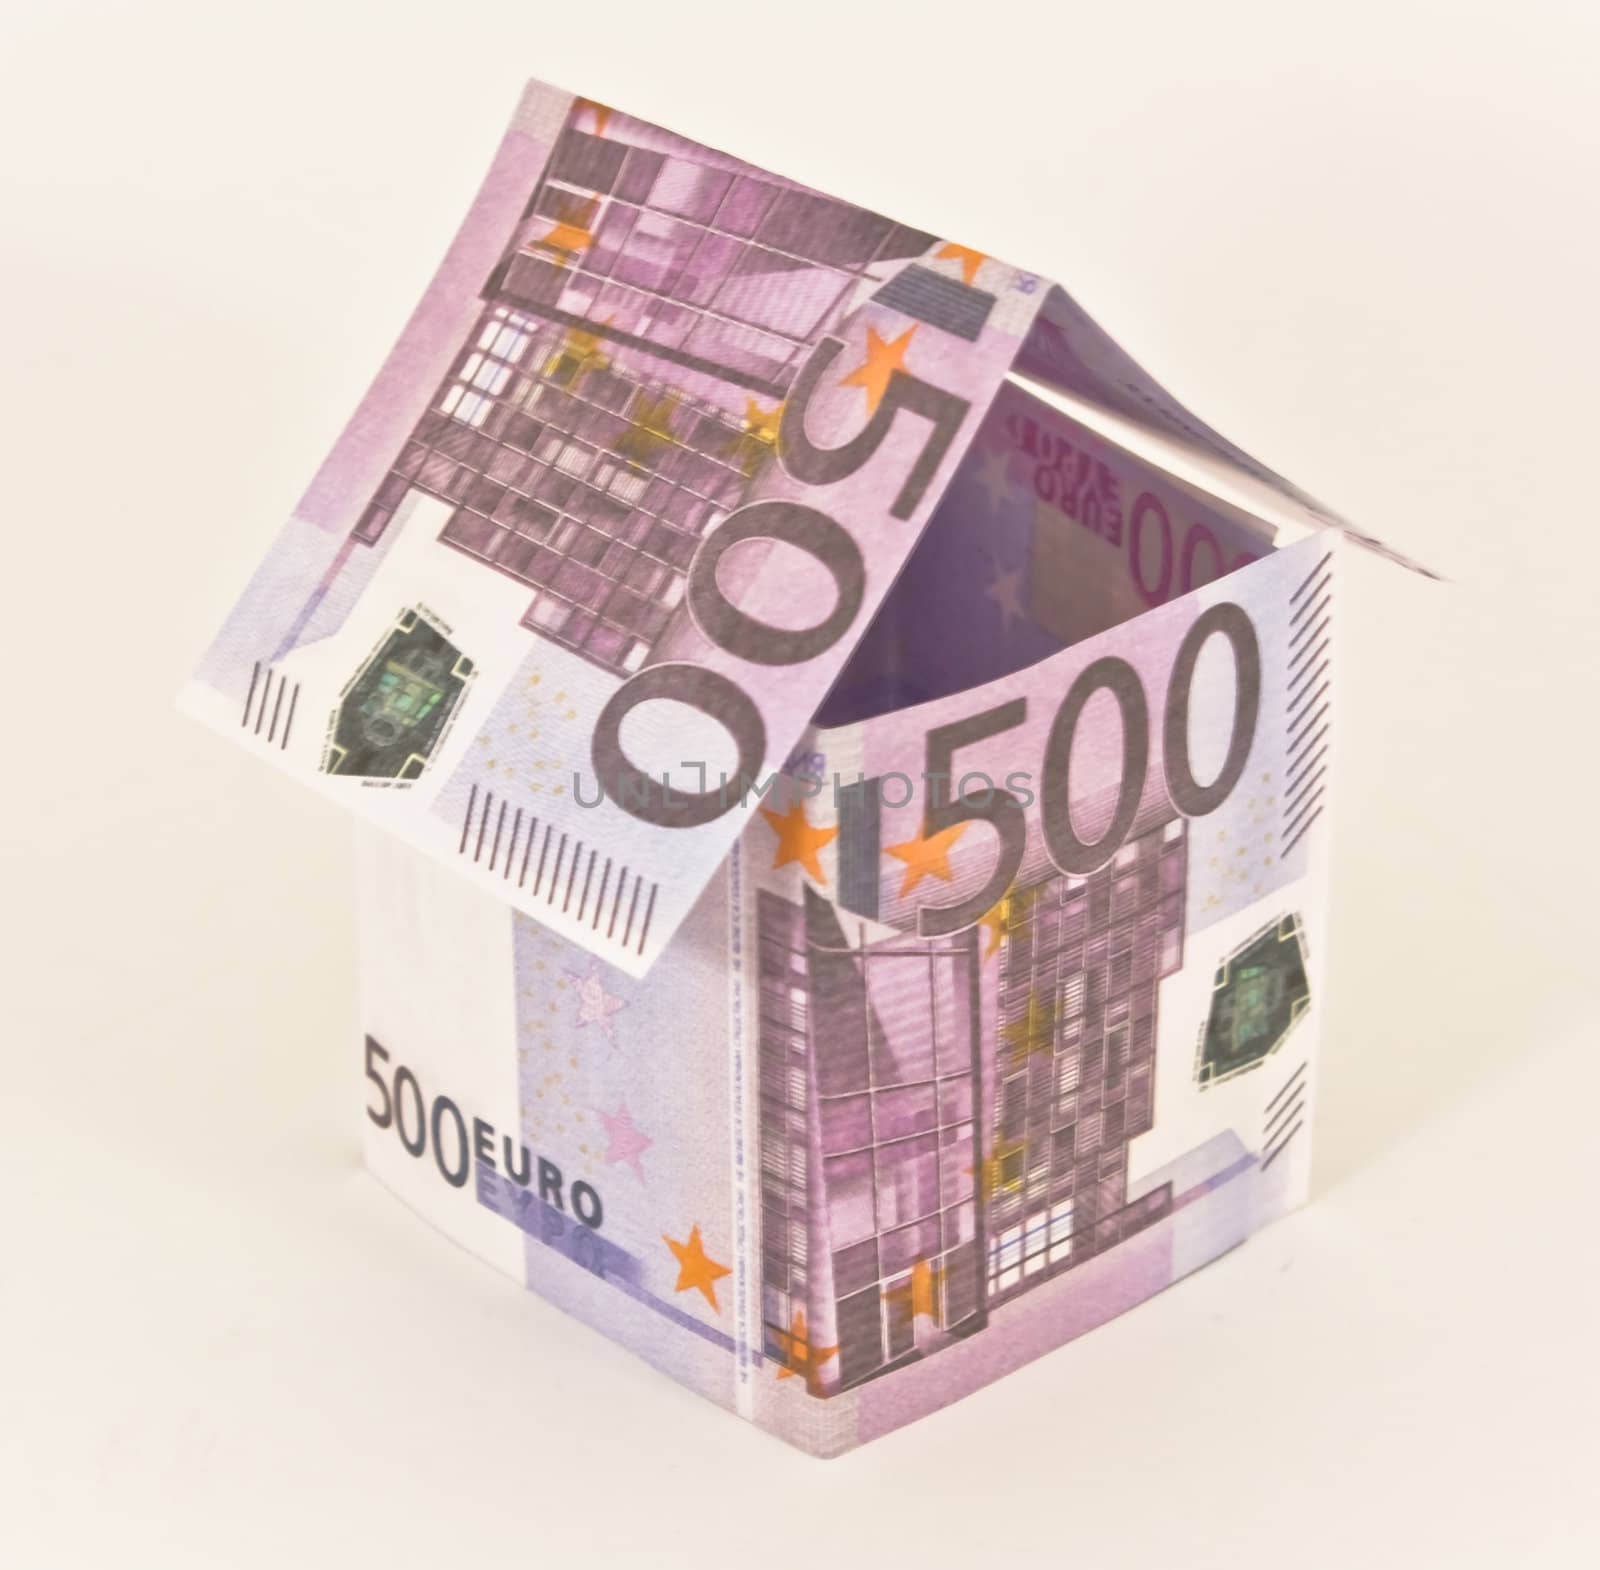 Money house made from 500 Euro banknotes by Baltus